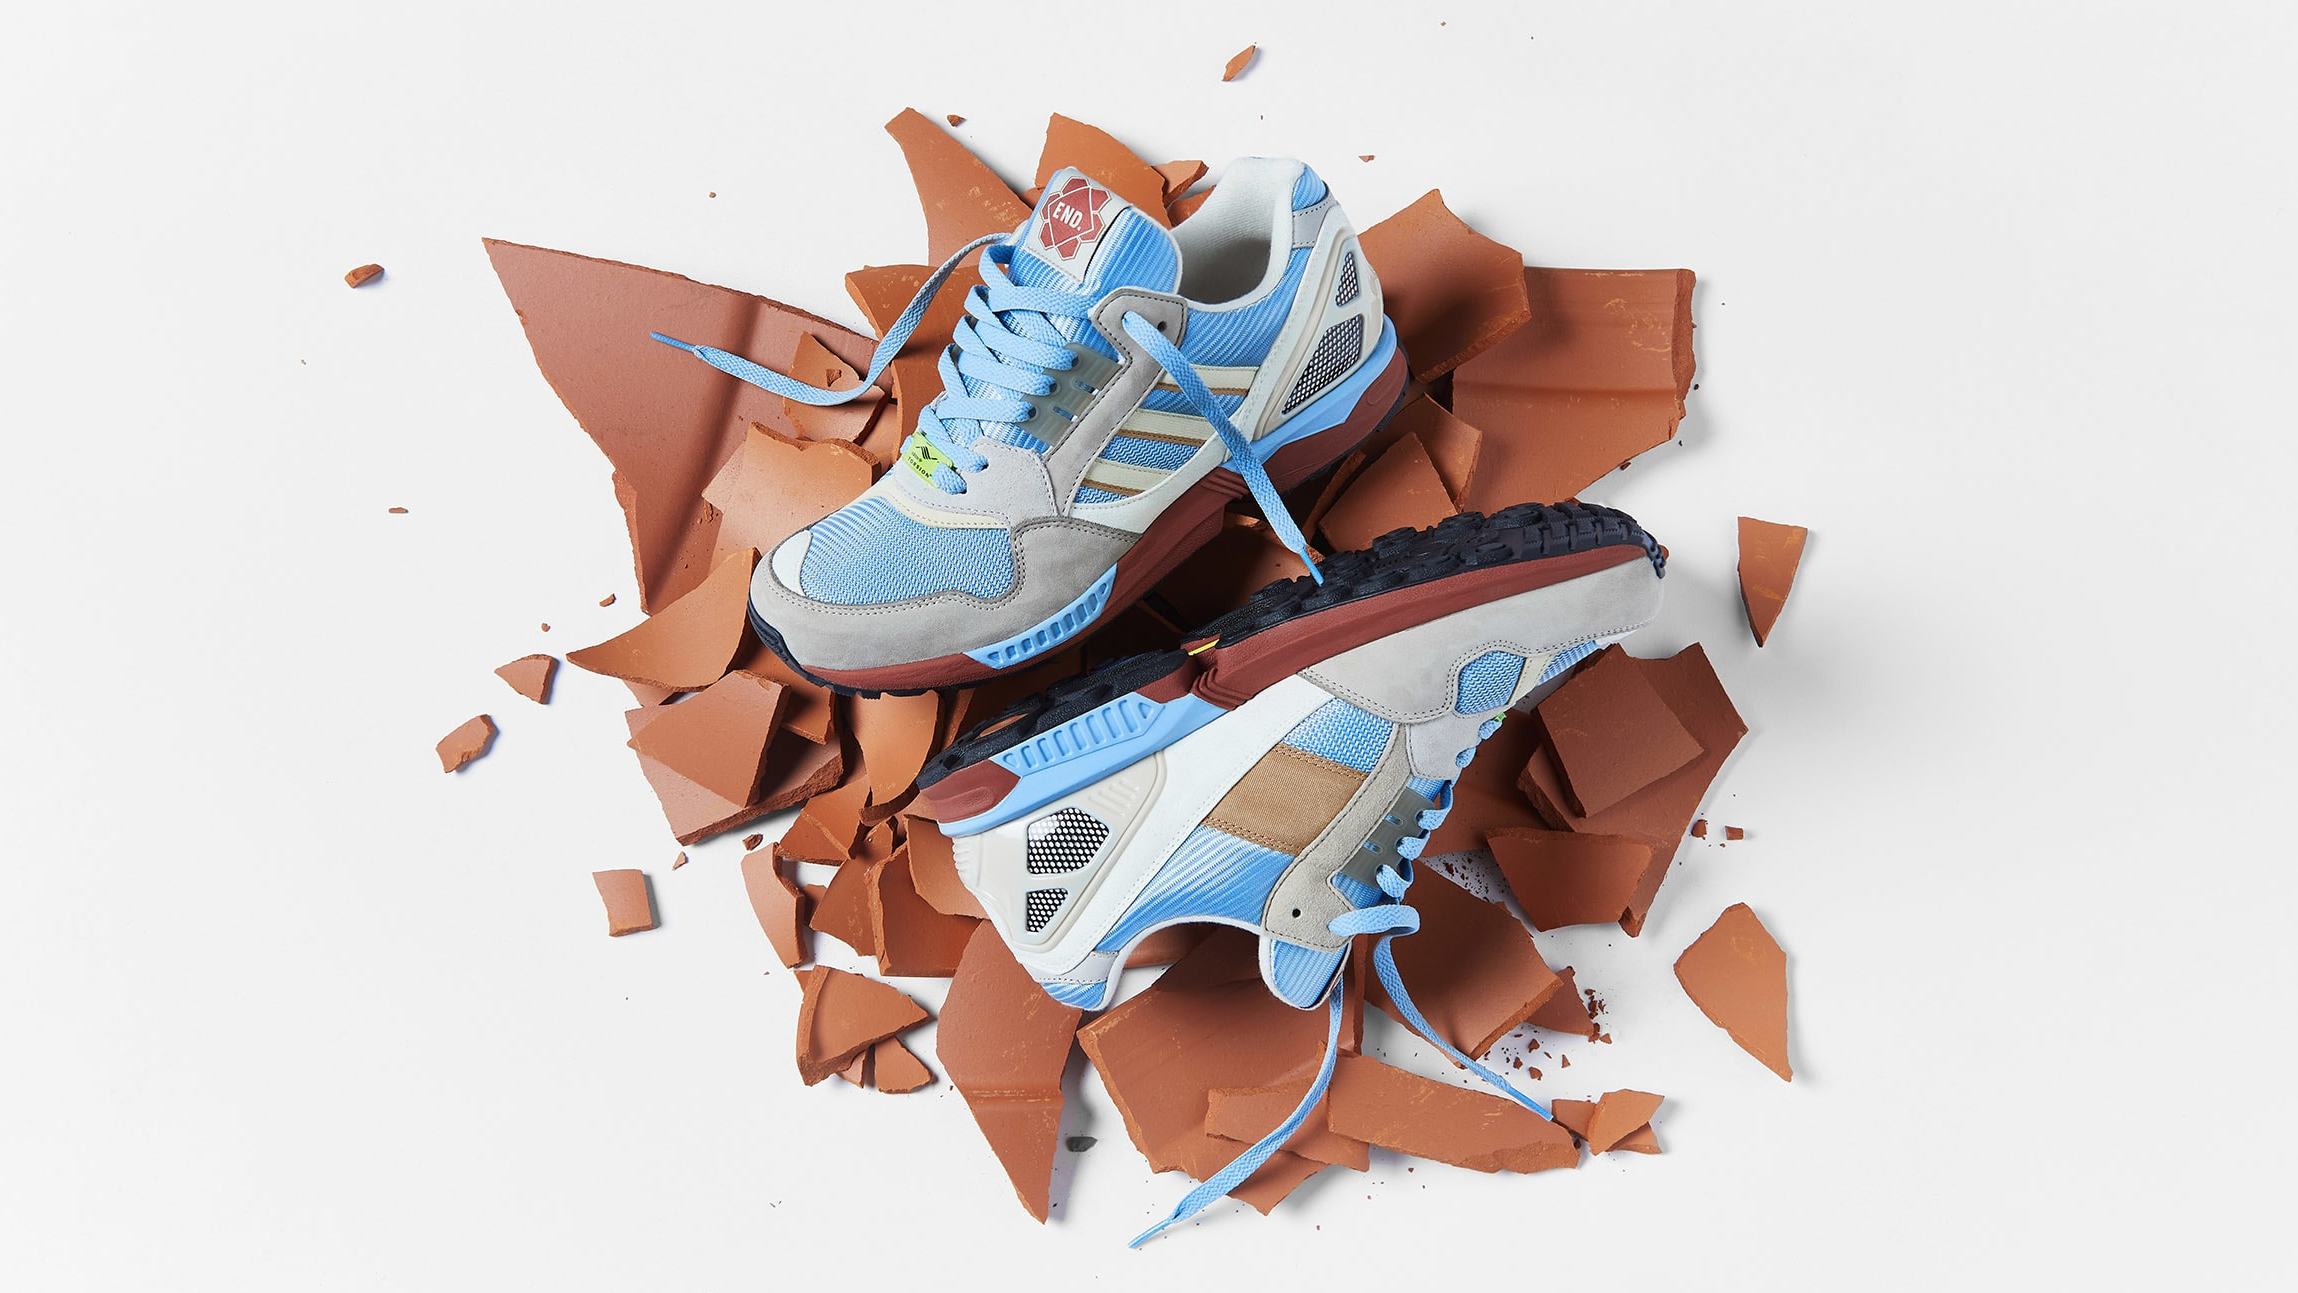 End. Clothing x Adidas ZX 9000 'Kiln' Collab Release Date FW5022 